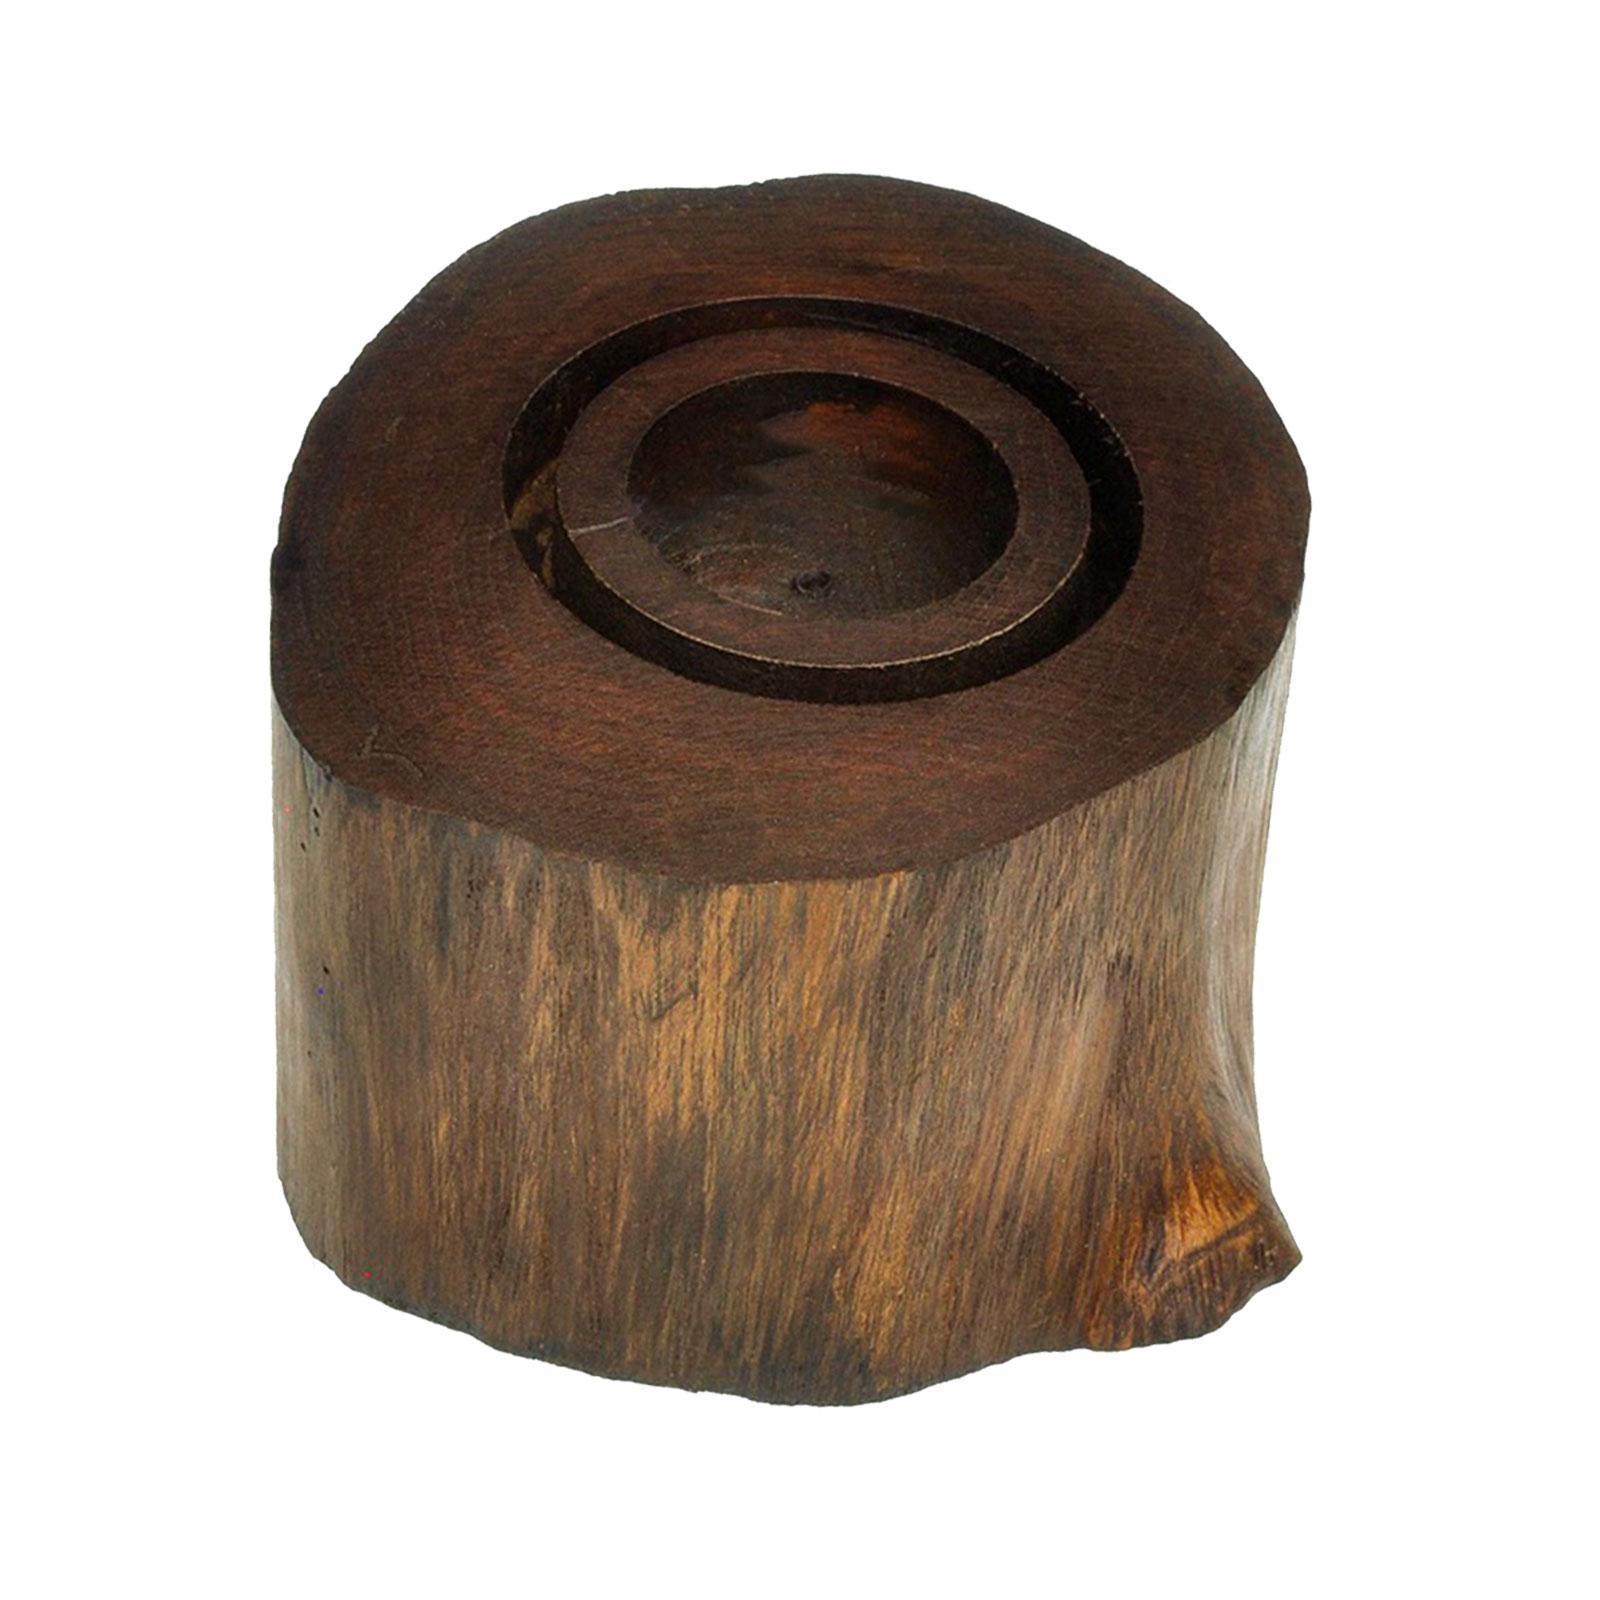 Wooden Candle Holder Candlestick Ornament Retro Style Tea Light Holders